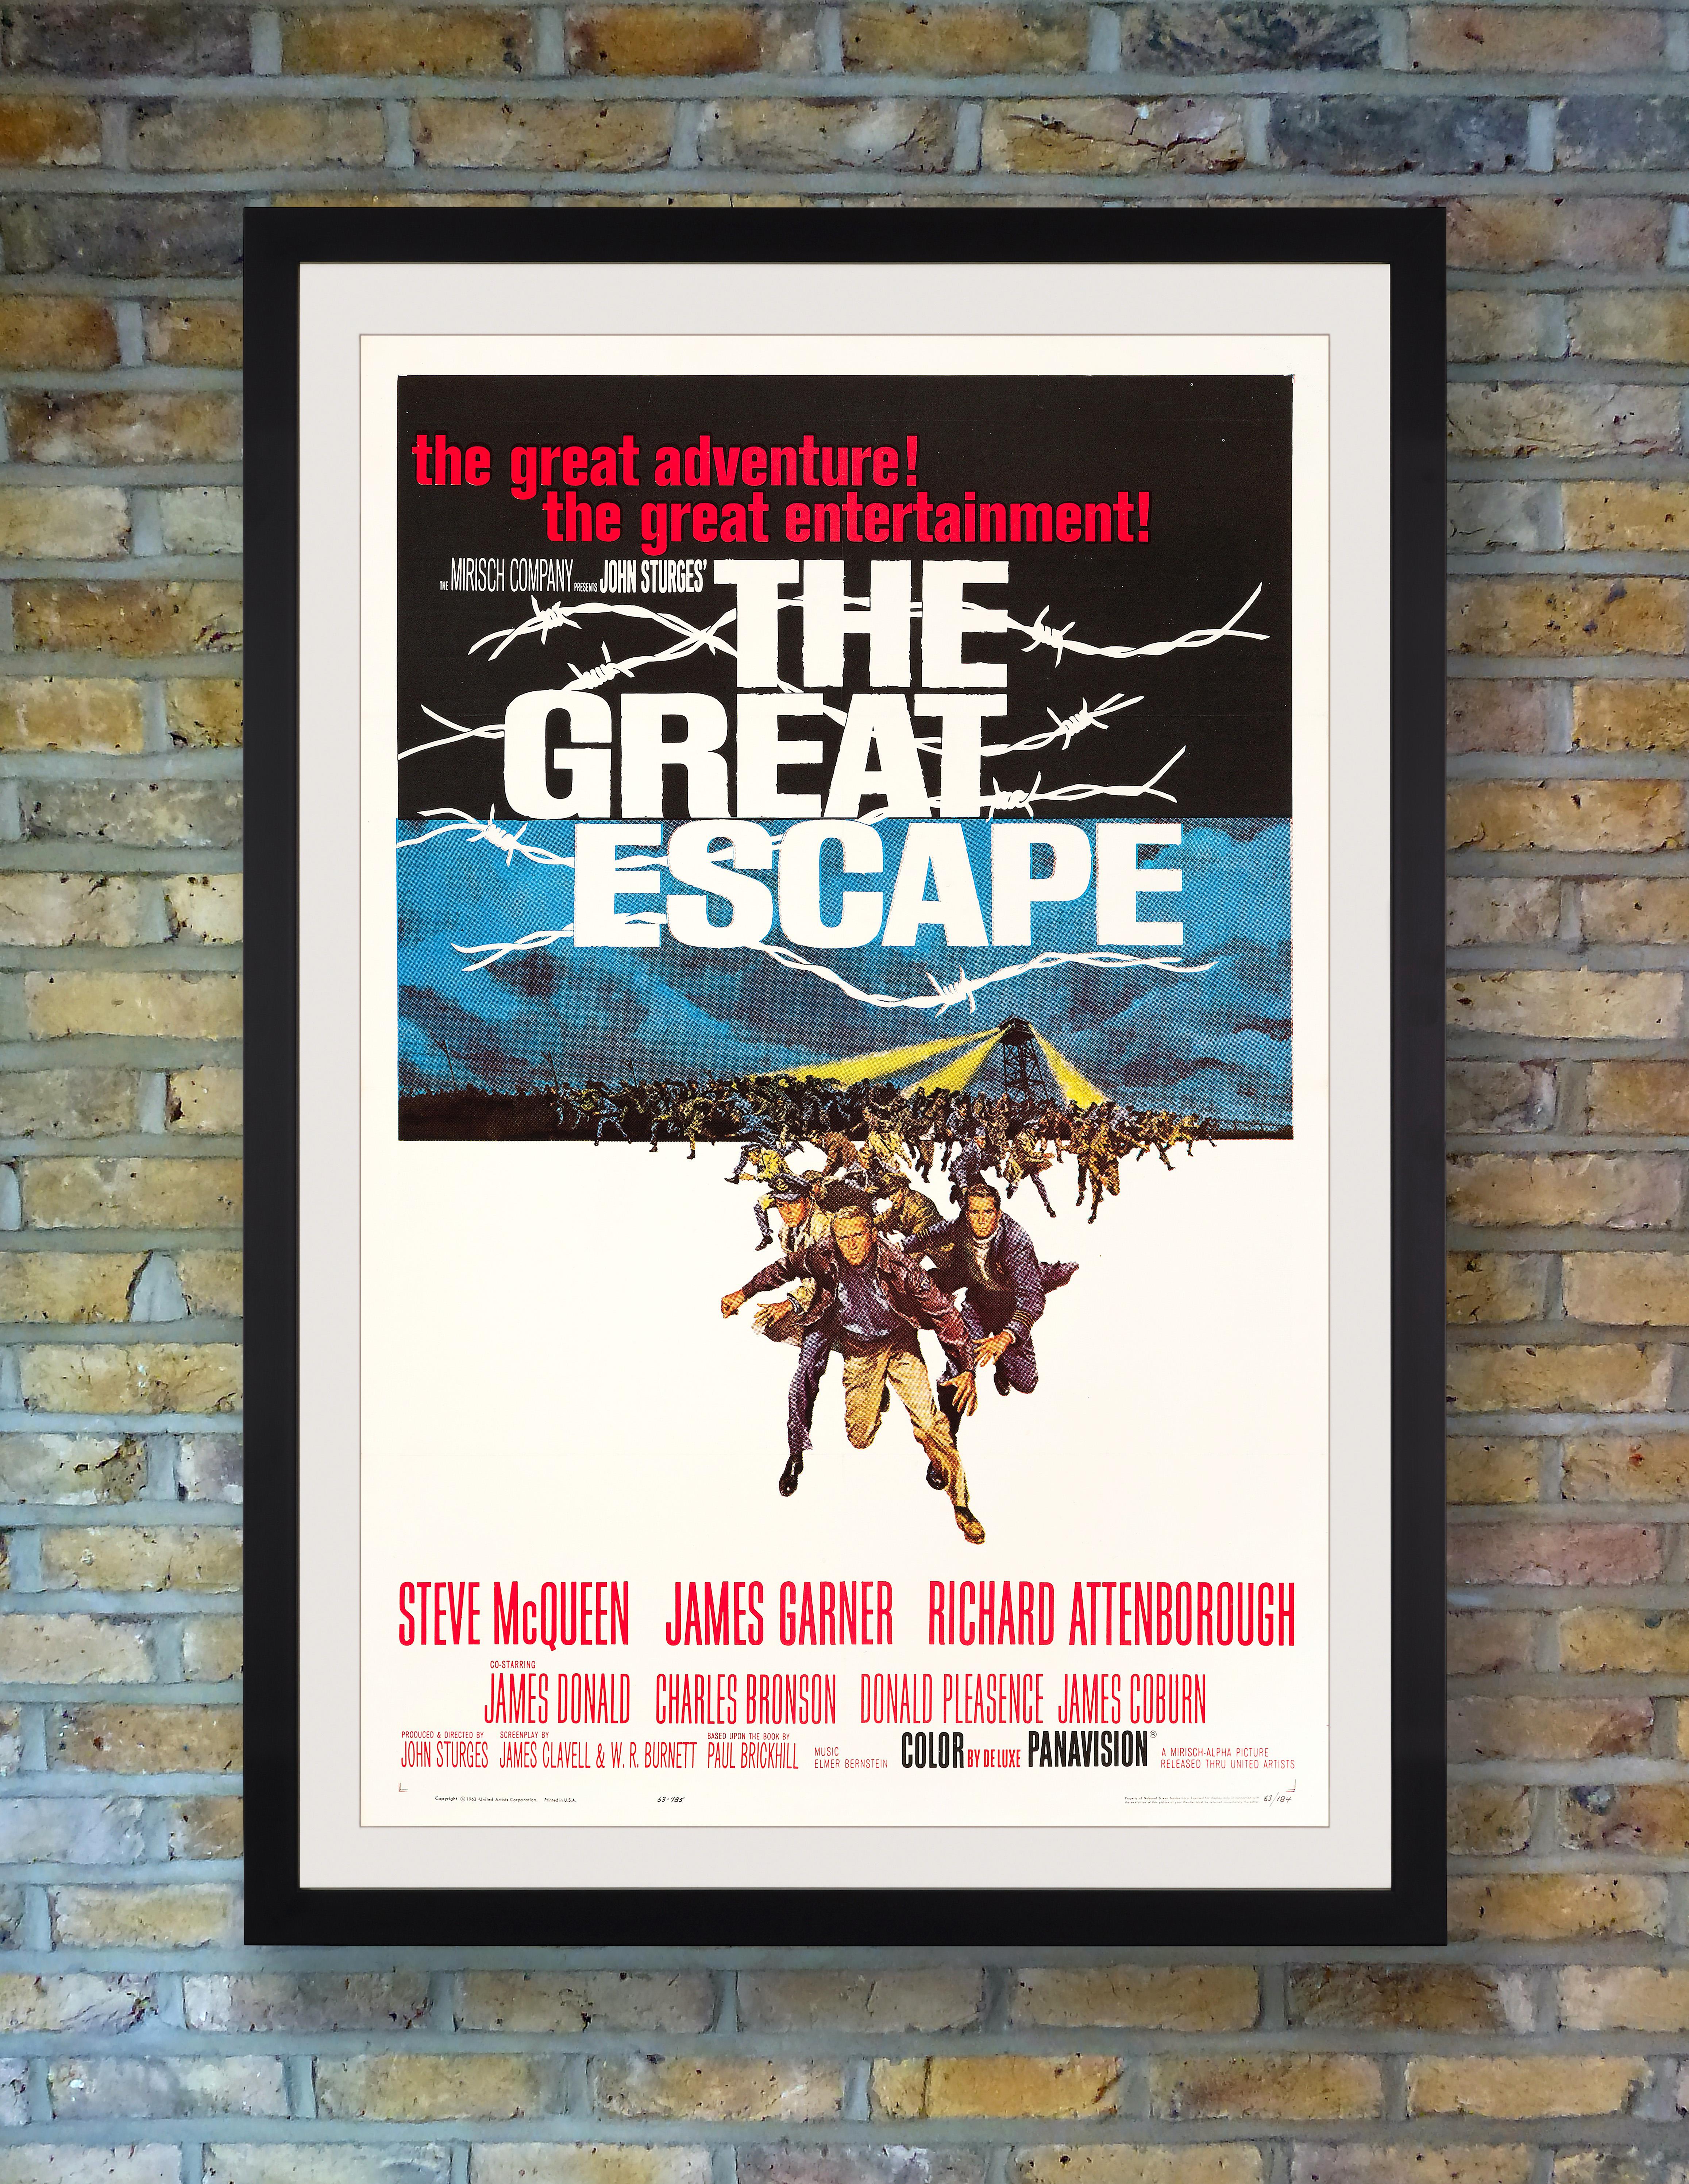 Best known for his action packed James Bond posters, American artist Frank McCarthy's dynamic design for John Sturges' spectacular 1963 wartime adventure 'The Great Escape' features king of cool Steve McQueen front and centre, leading co-stars James